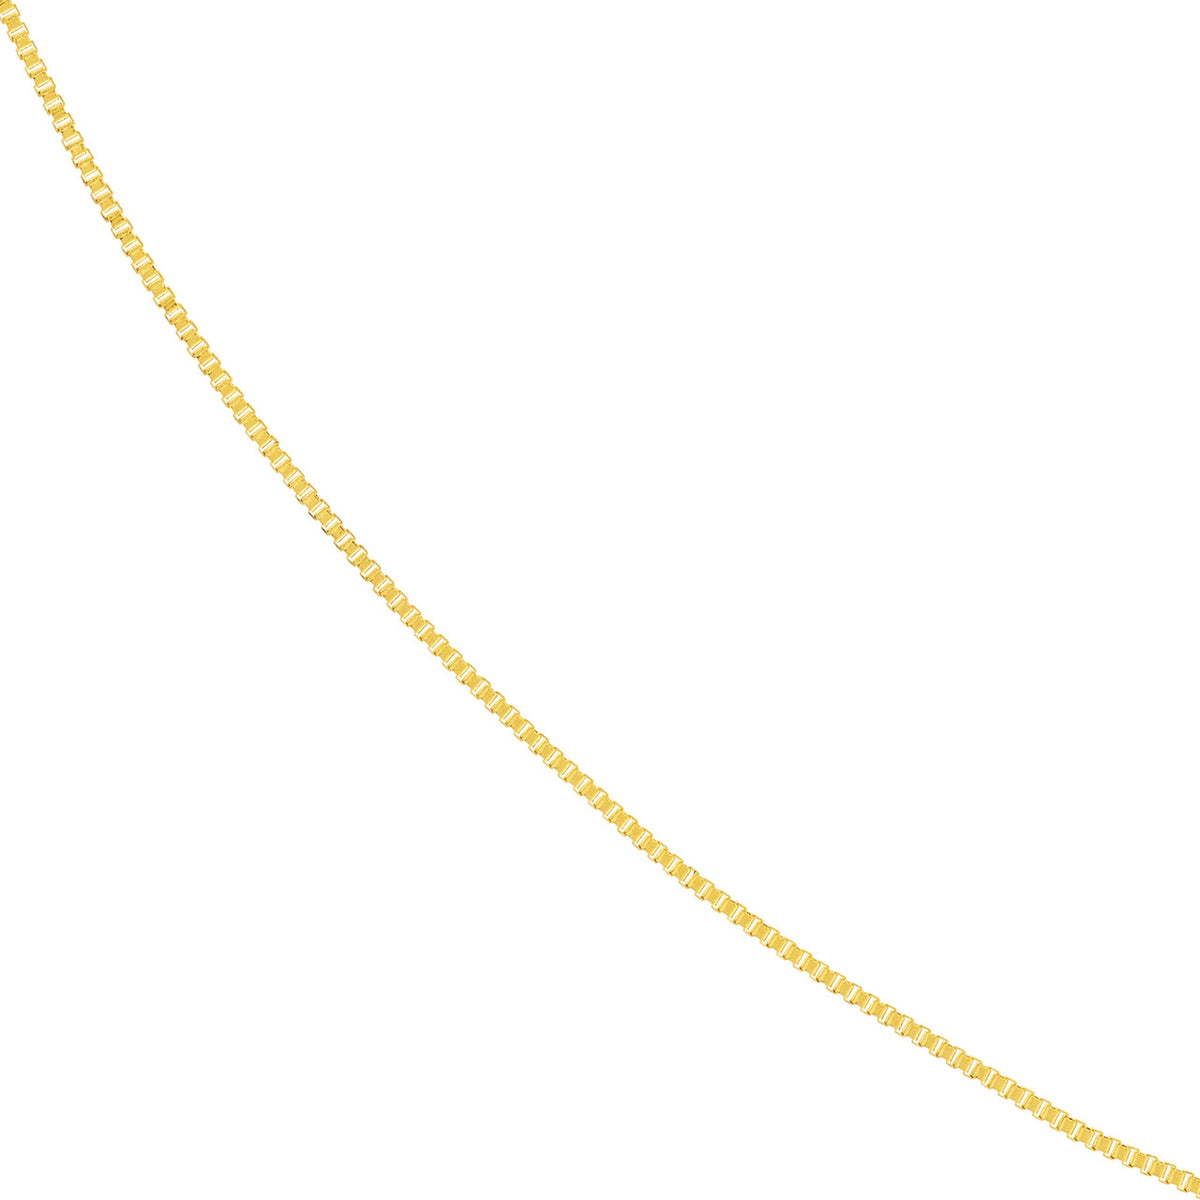 14K Yellow Gold and White Gold 0.42mm Box Chain Necklace with Spring Ring